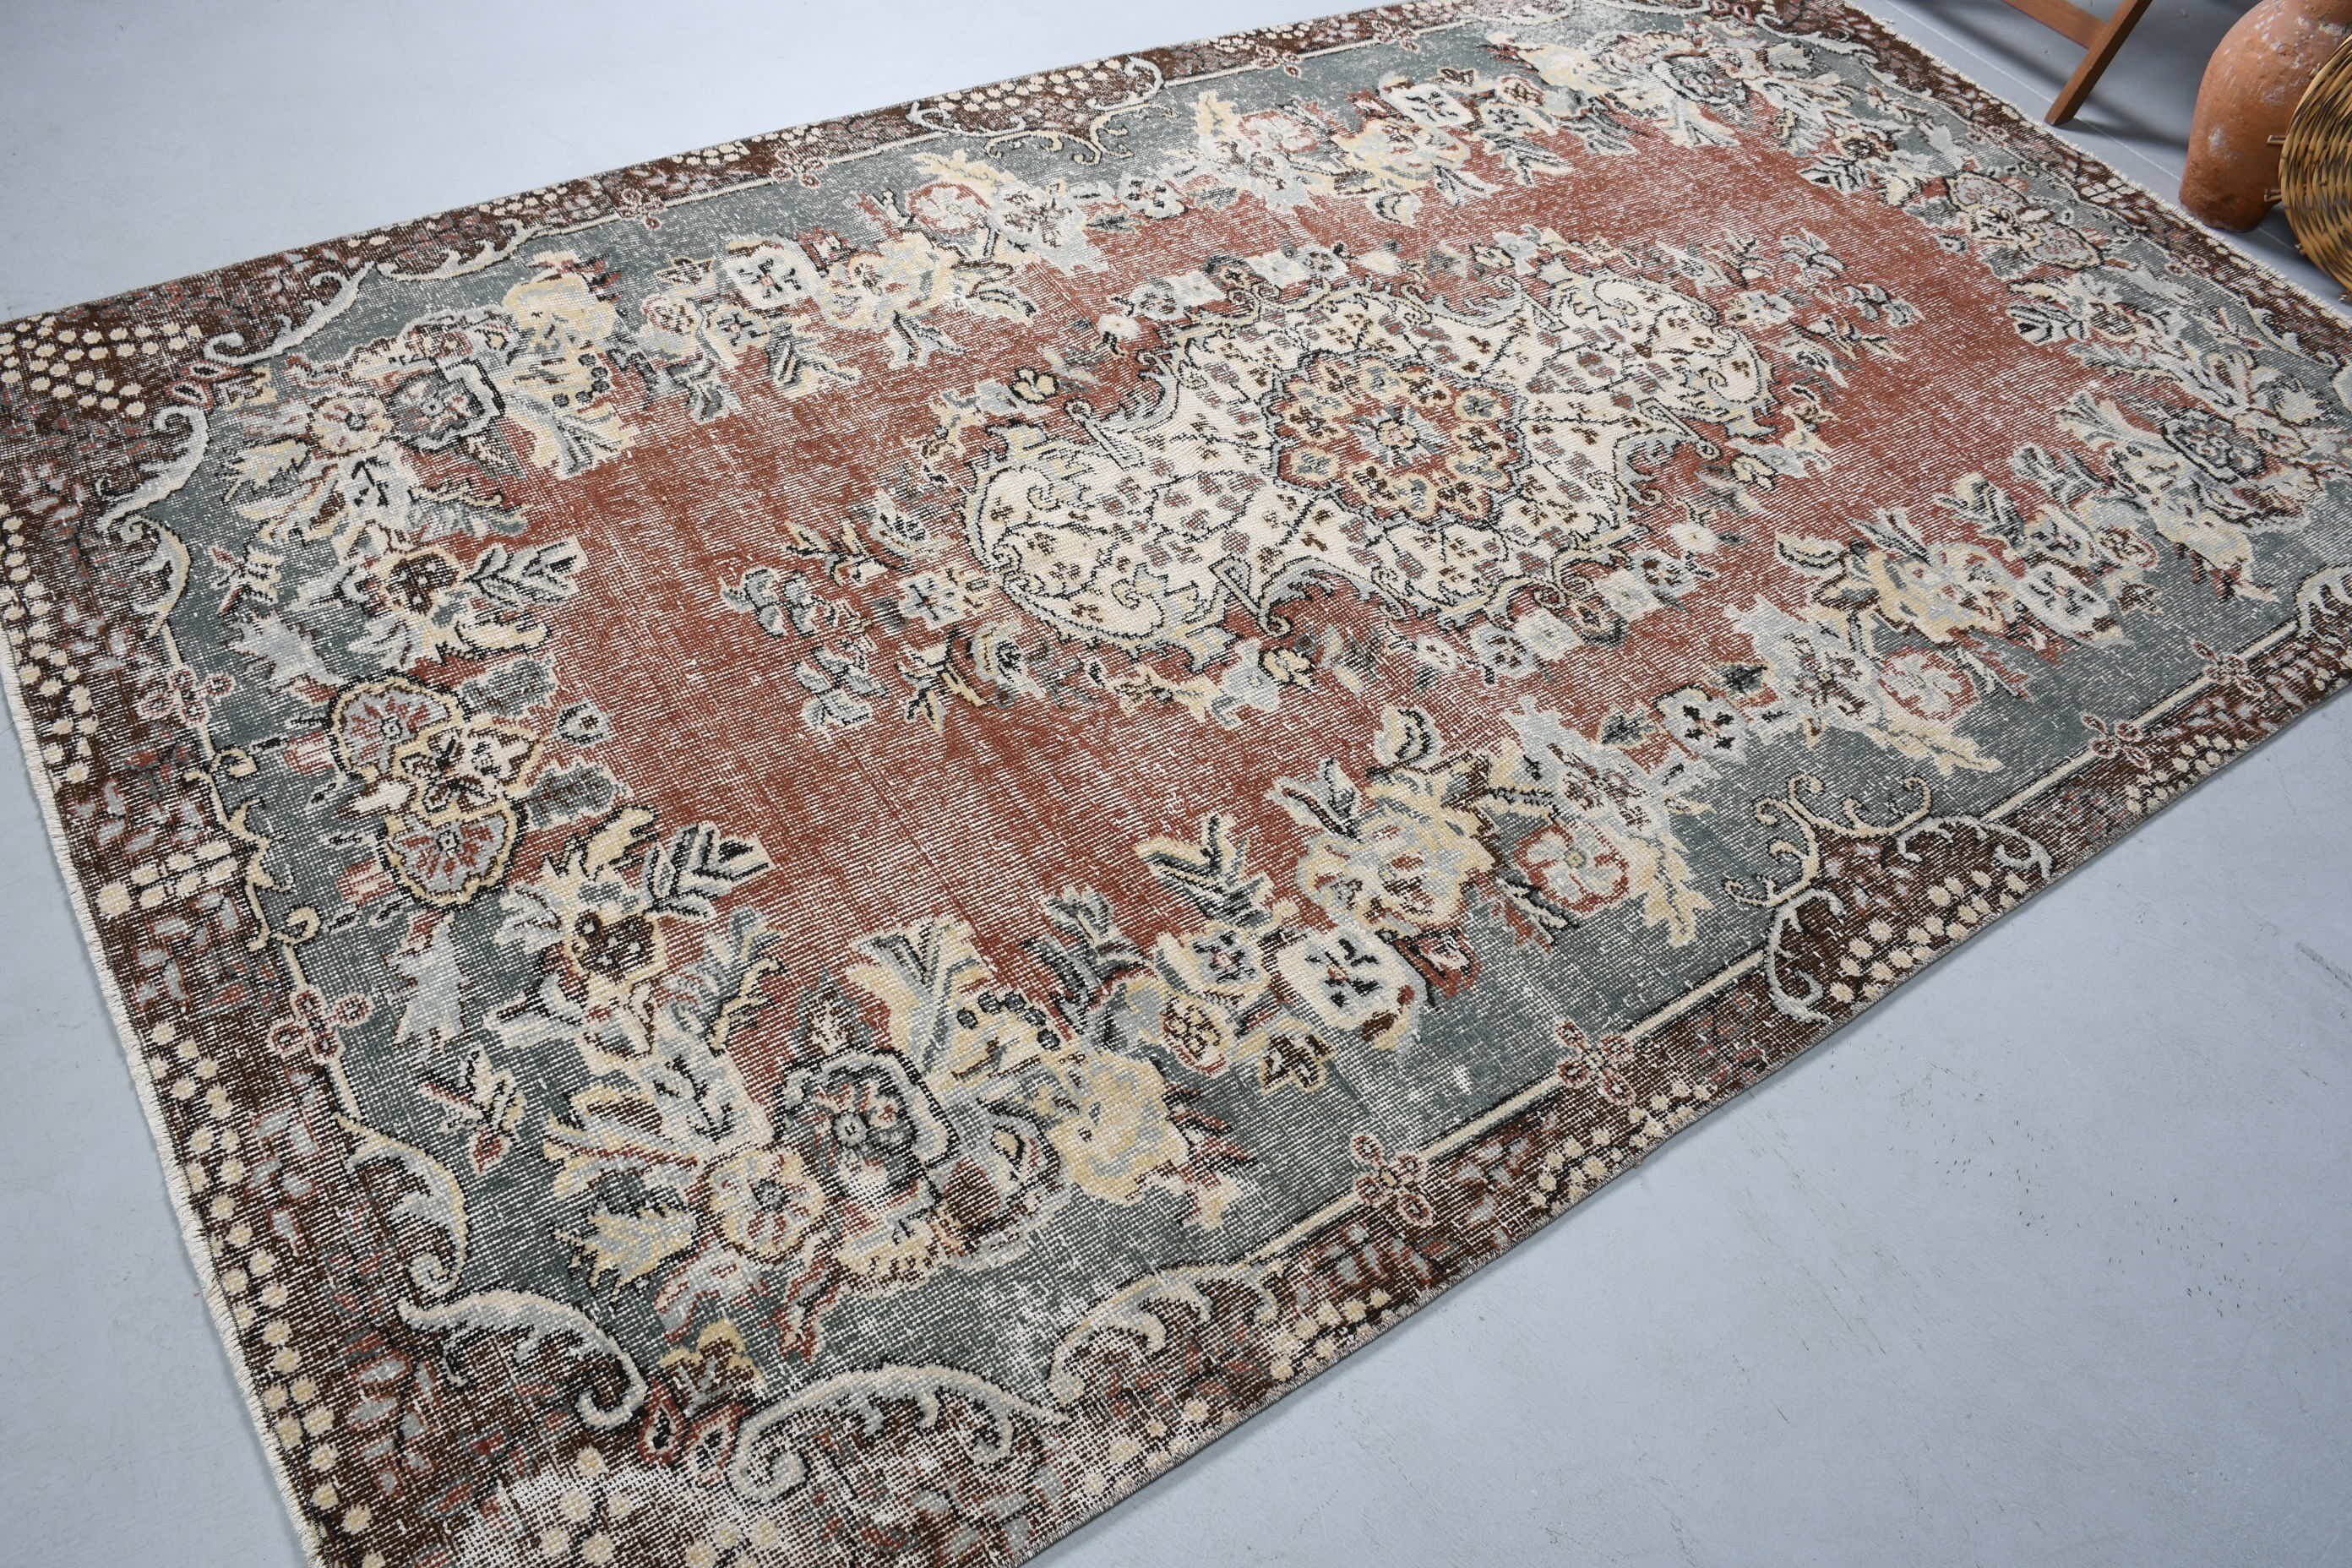 Turkish Rugs, Bedroom Rug, Dining Room Rugs, Cool Rug, Vintage Rugs, Salon Rug, 5.6x9.3 ft Large Rug, Red Kitchen Rugs, Rugs for Salon